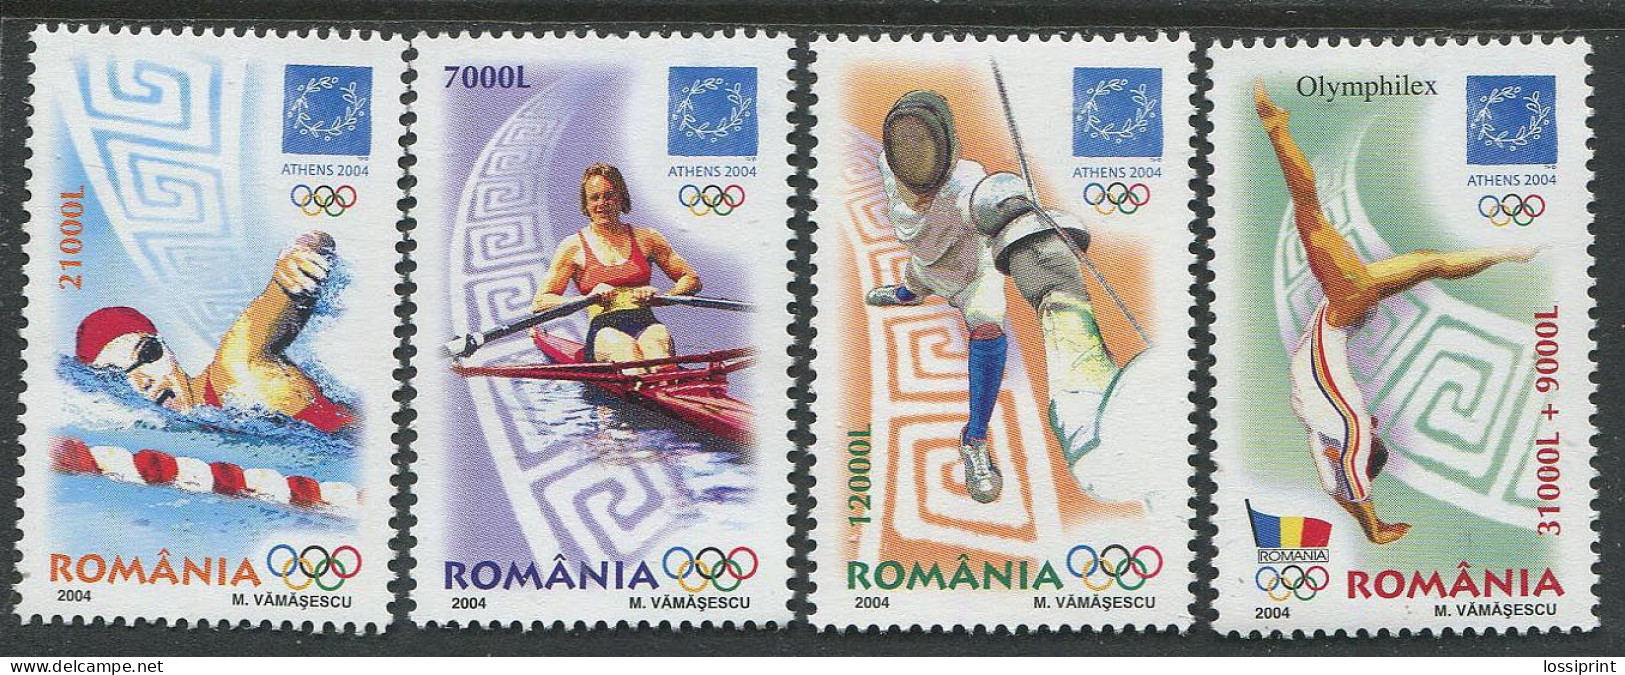 Romania:Unused Stamps Serie Athens Olympic Games 2004, MNH - Sommer 2004: Athen